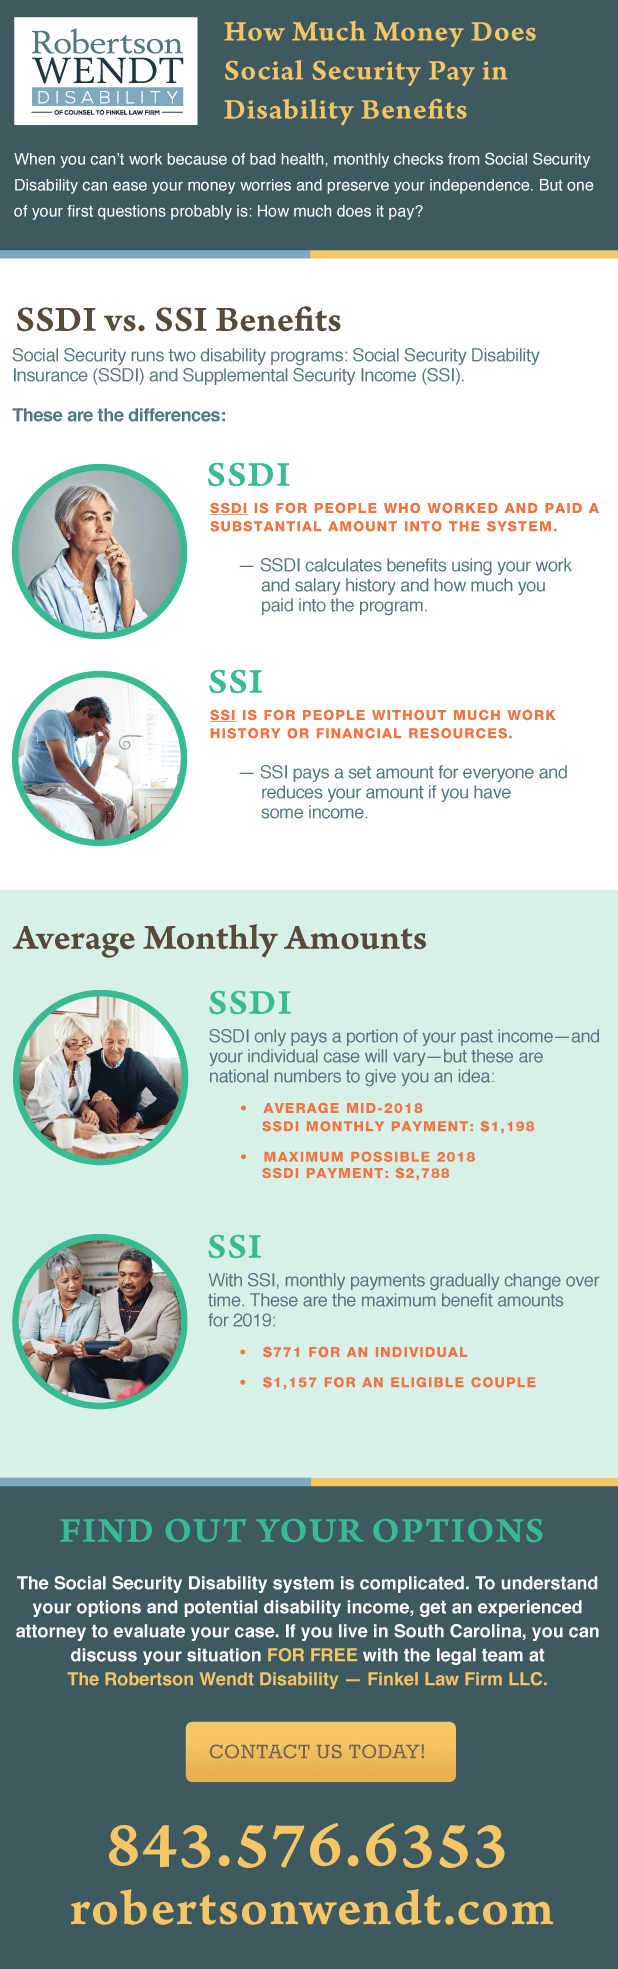 How Much Money Does Social Security Pay in Disability Benefits Infographic